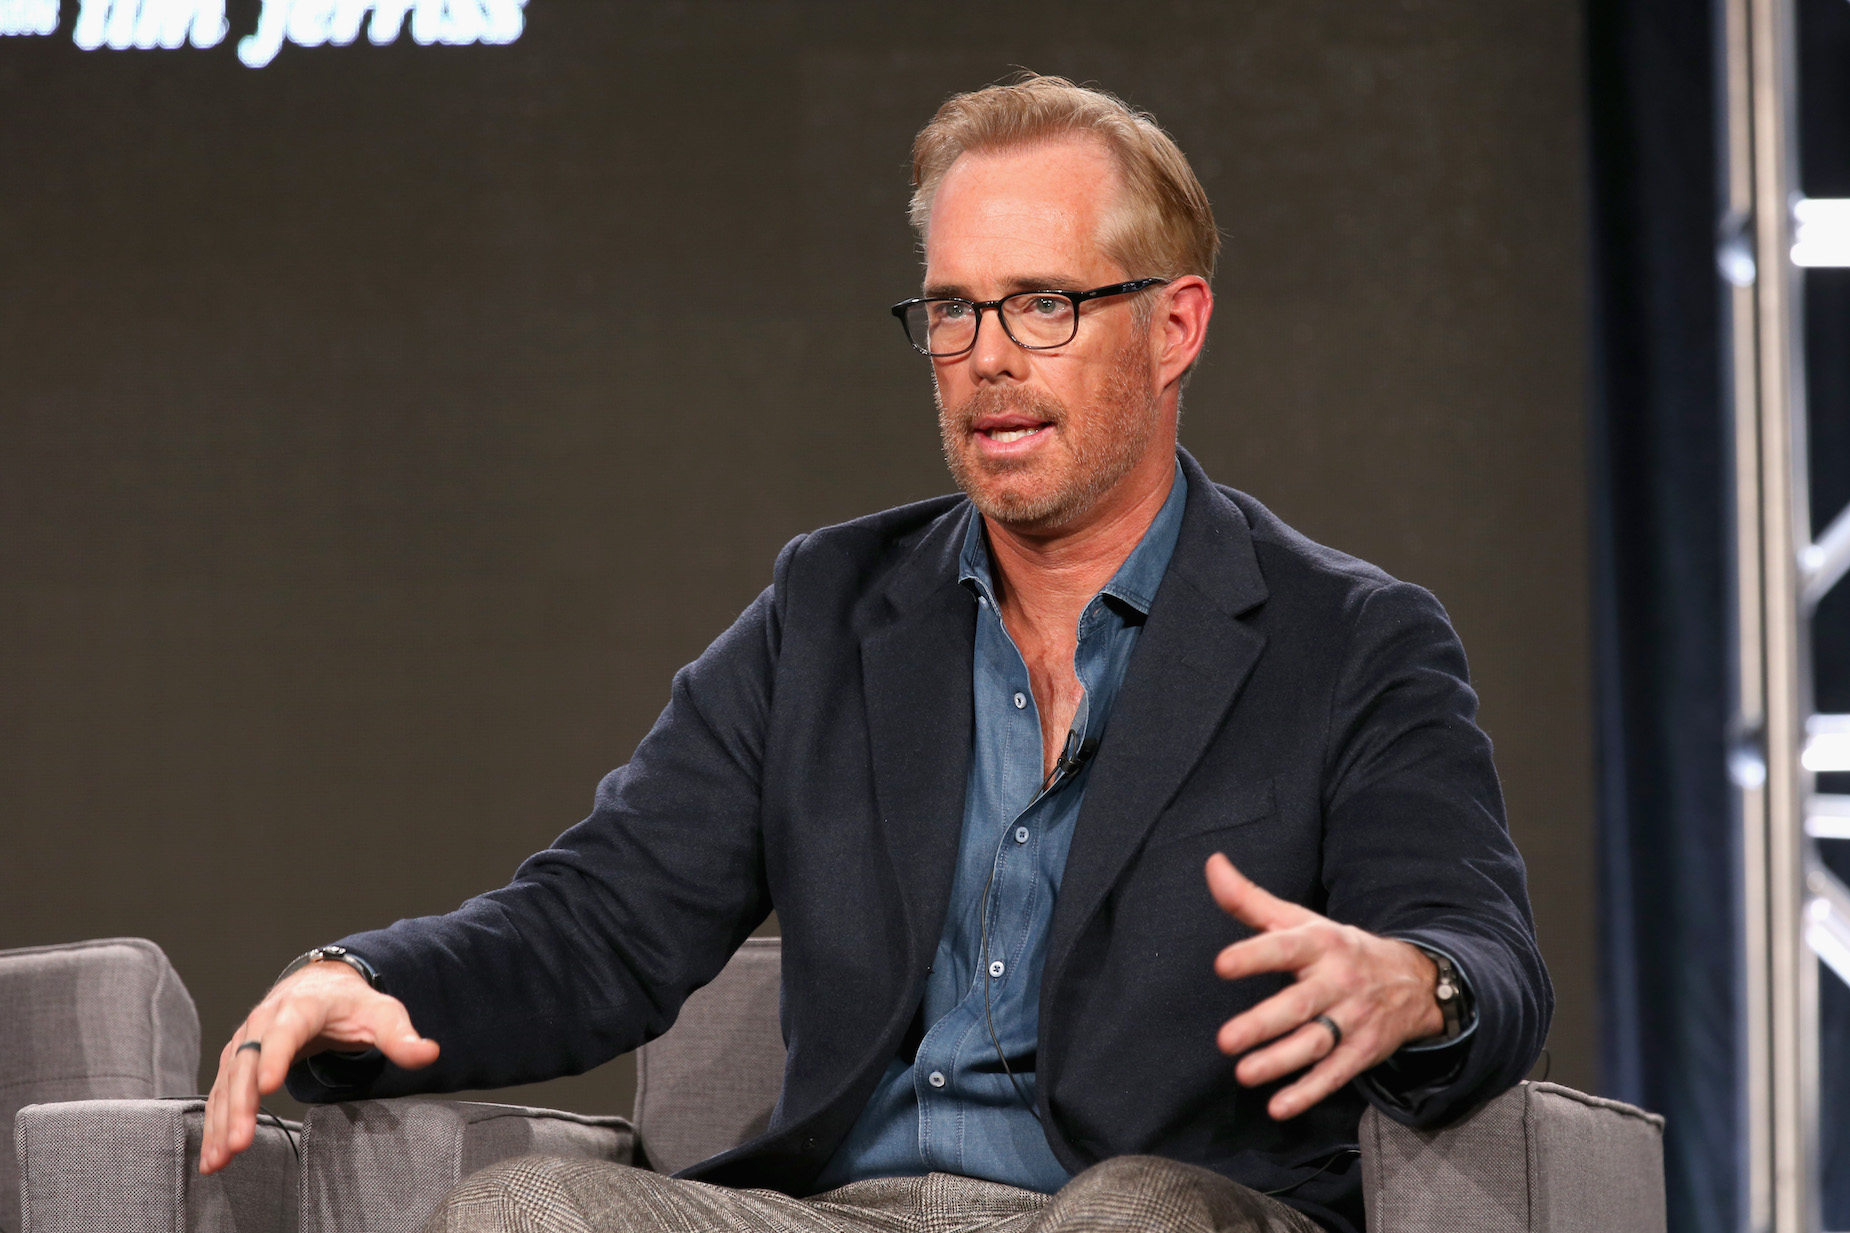 Joe Buck once ate too many pot brownies during a trip to Mexico and 'damn near died.'